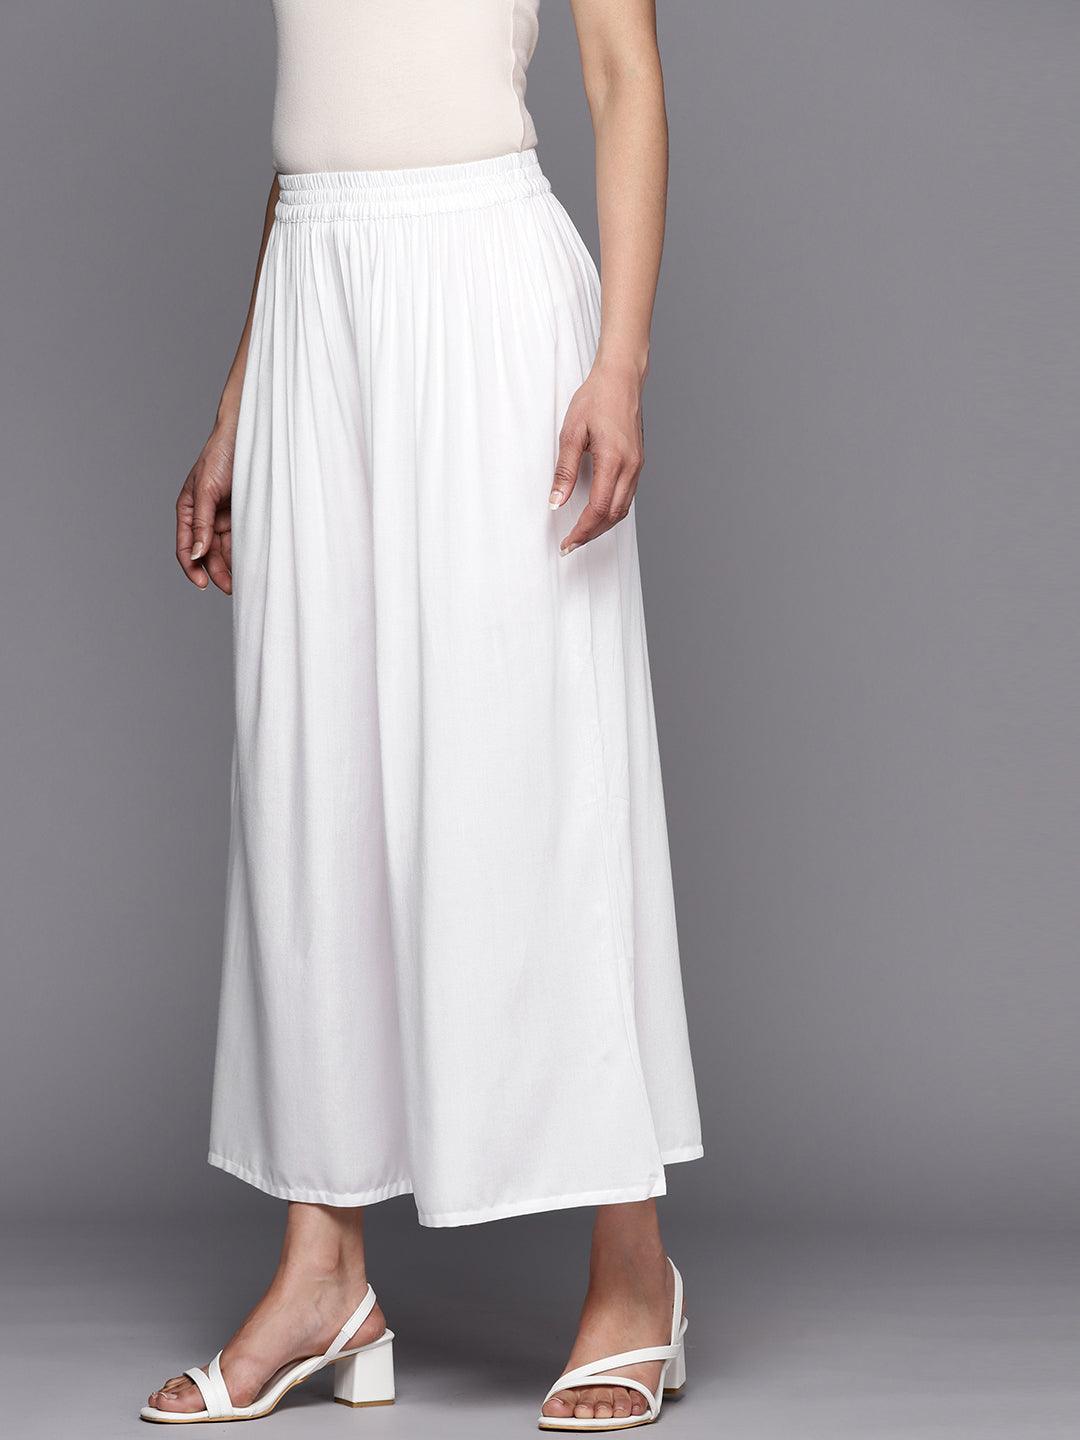 How to Power Through Doubt and Make Yourself a Pair of Self-Drafted Airy-  Crisp Poplin Skirt-Pants – the thread